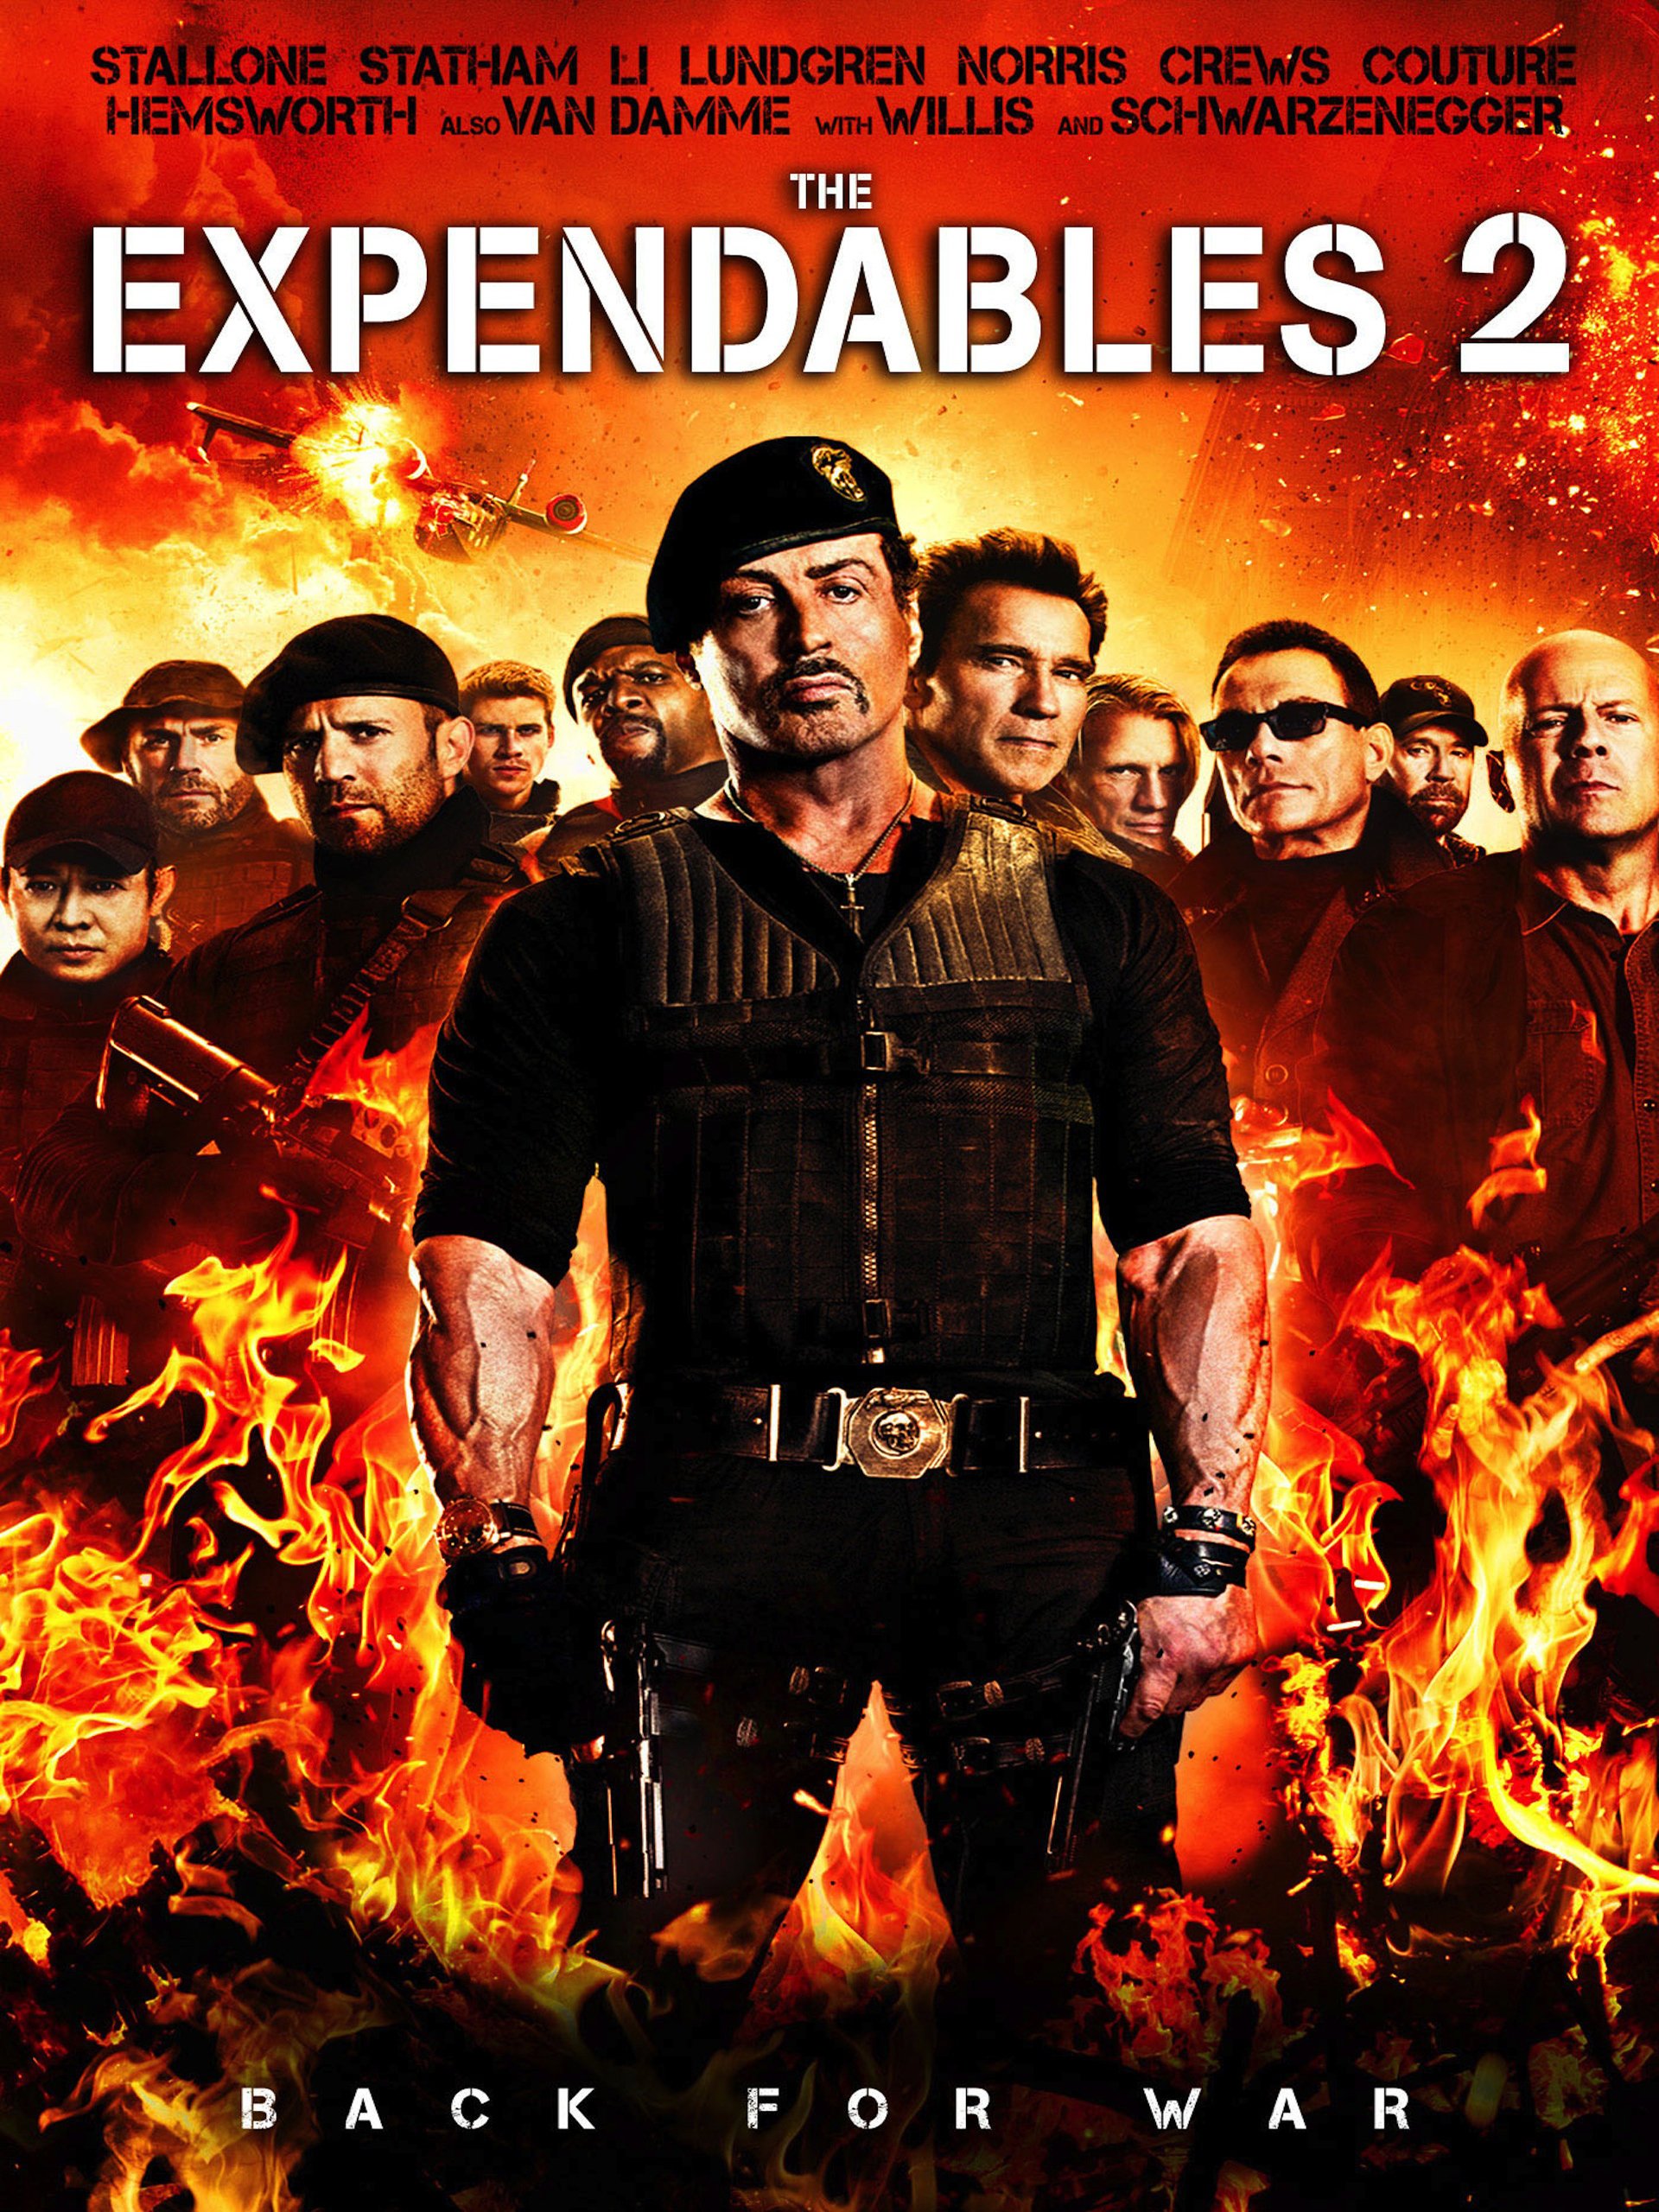 Download film expendable 2 2018